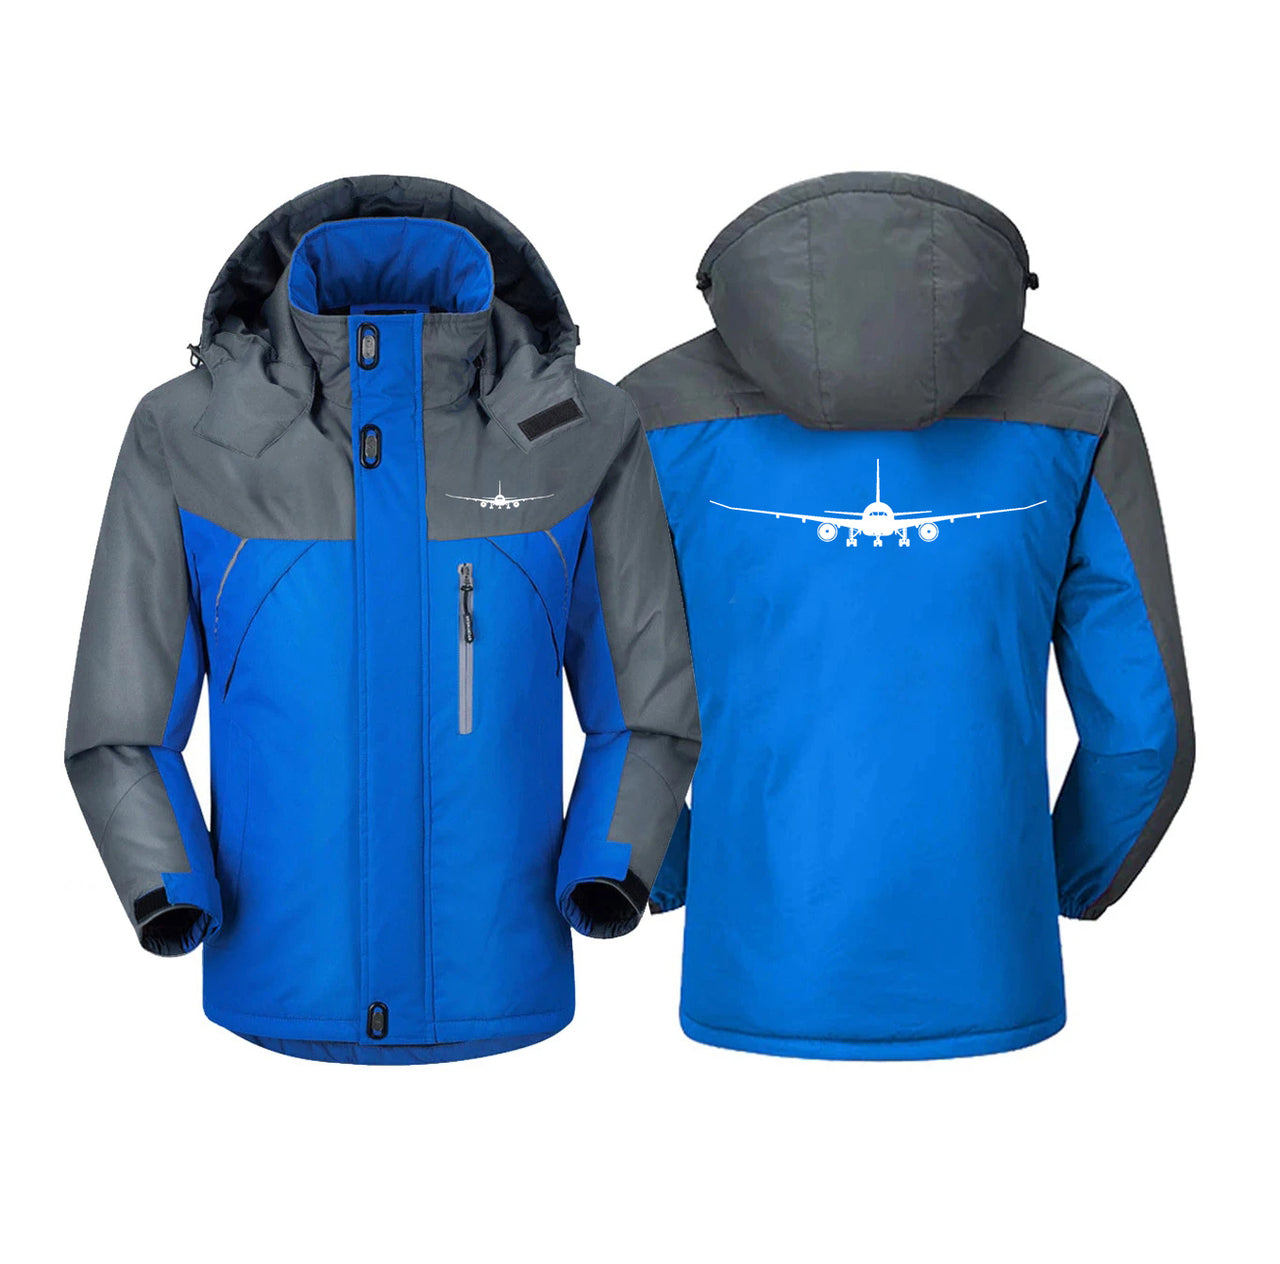 Boeing 787 Silhouette Designed Thick Winter Jackets